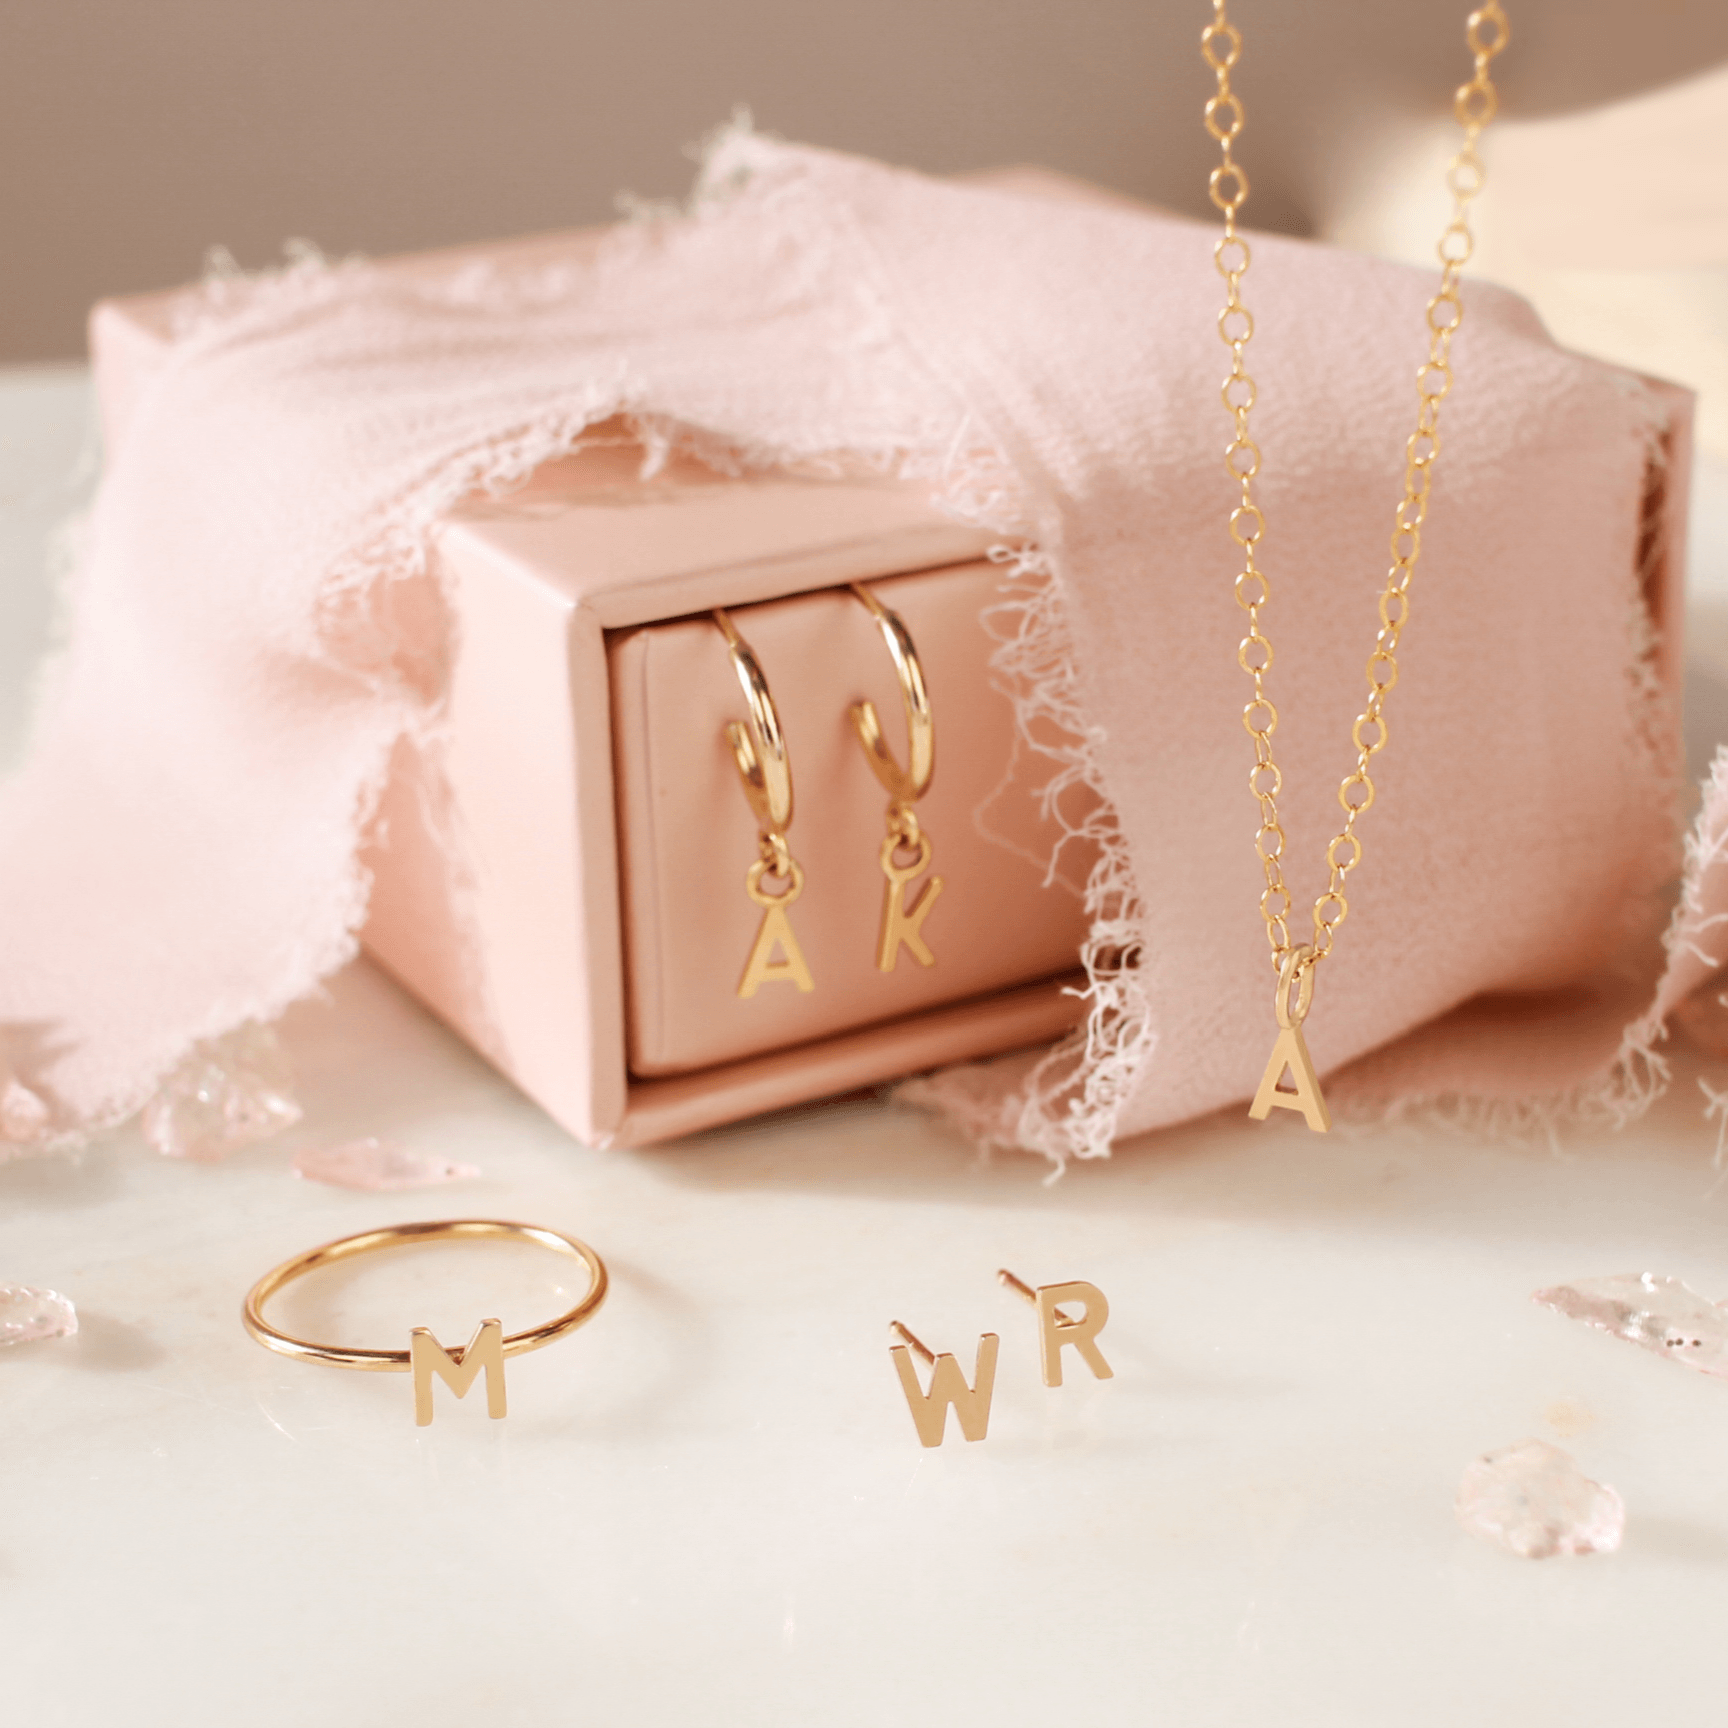 Ava Initial Stud • Single - Nolia Jewelry - Meaningful + Sustainably Handcrafted Jewelry